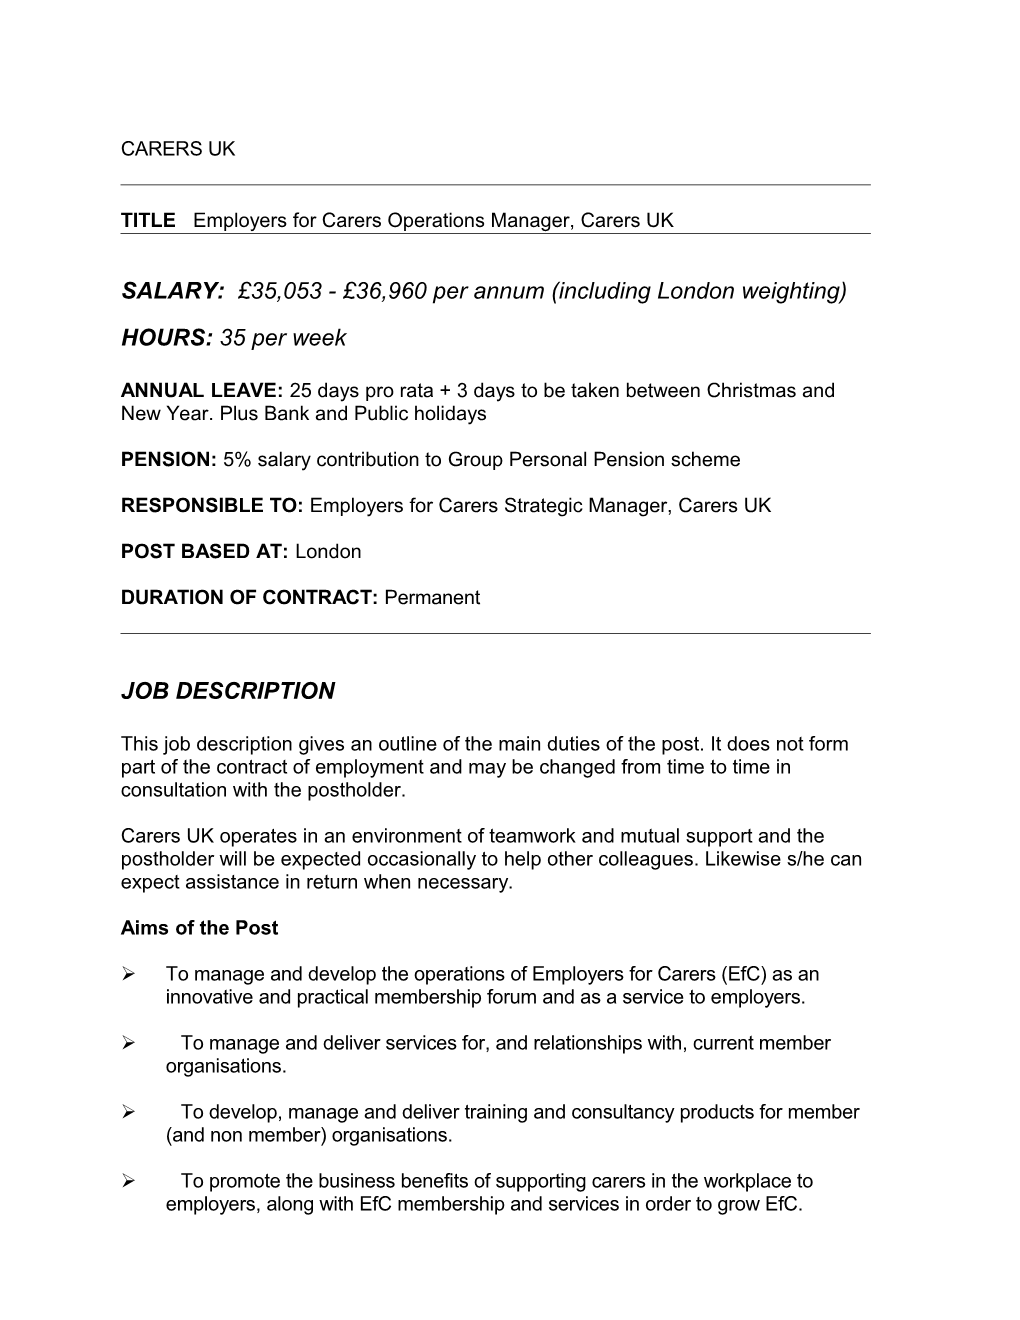 TITLE Employers for Carers Operationsmanager, Carers UK